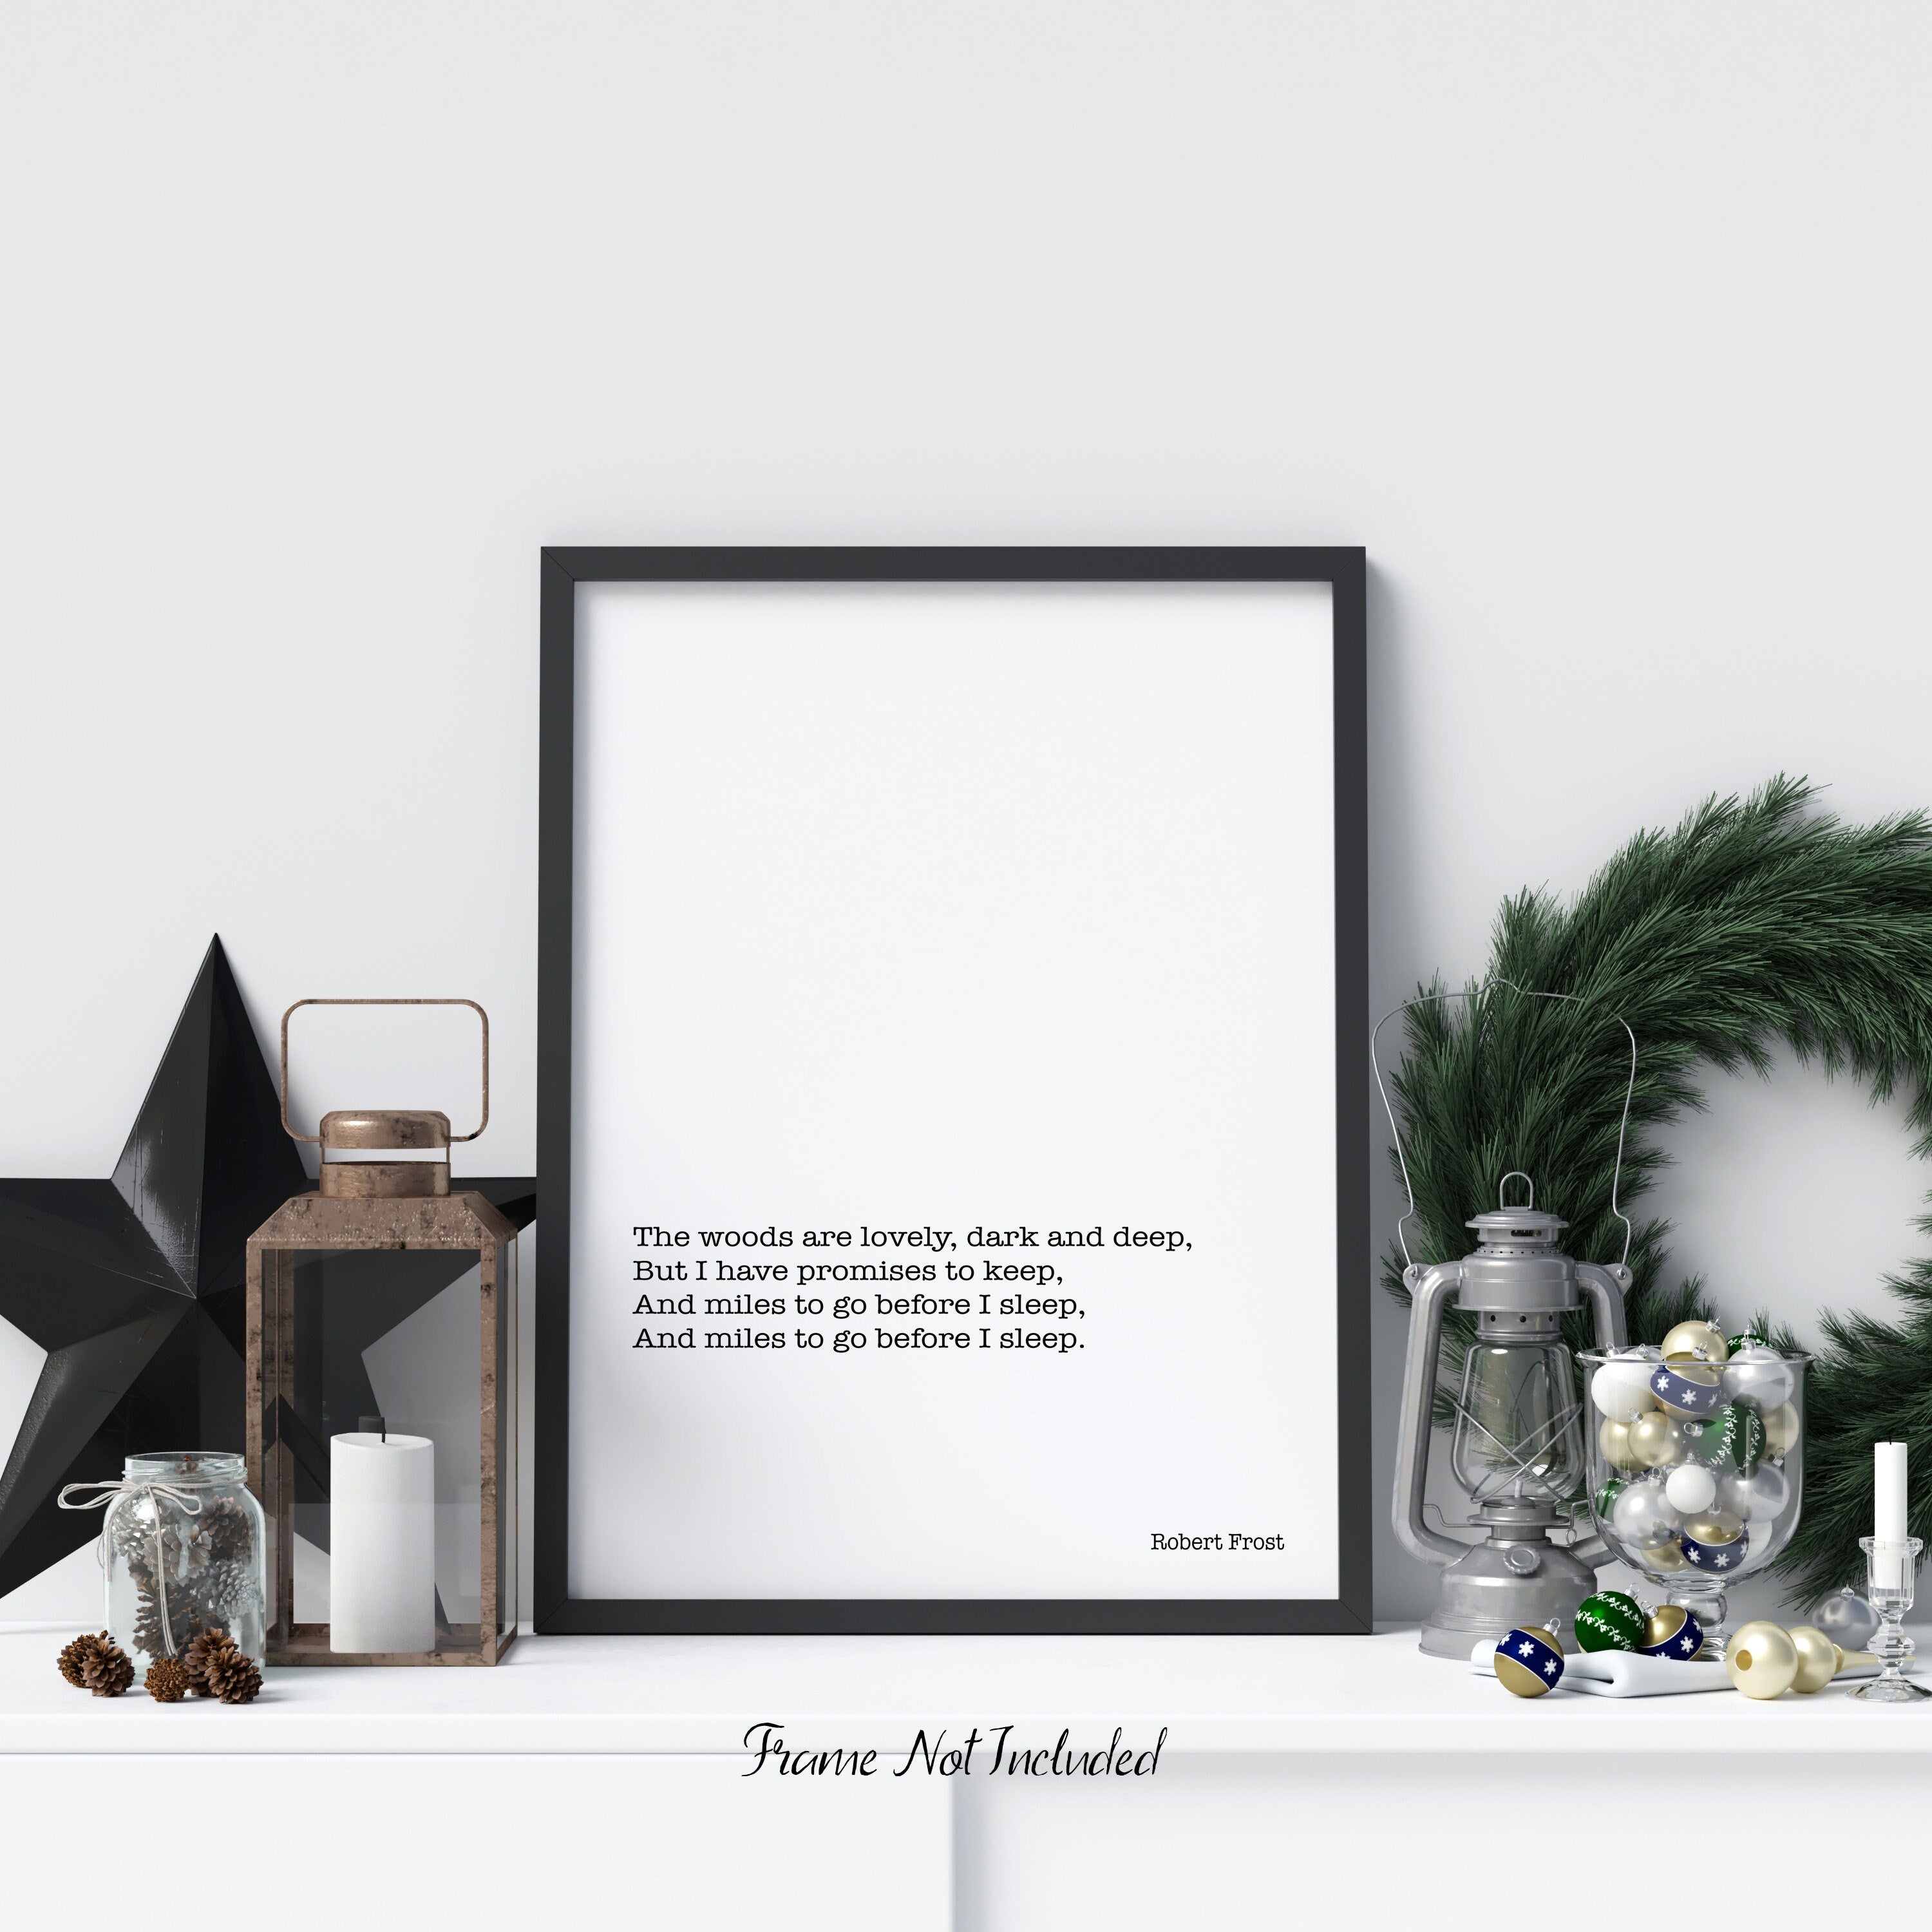 Robert Frost Poem Print, Snowy Evening Minimalist Scandinavian Style Poetry Poster in Black & White for Home Wall Decor